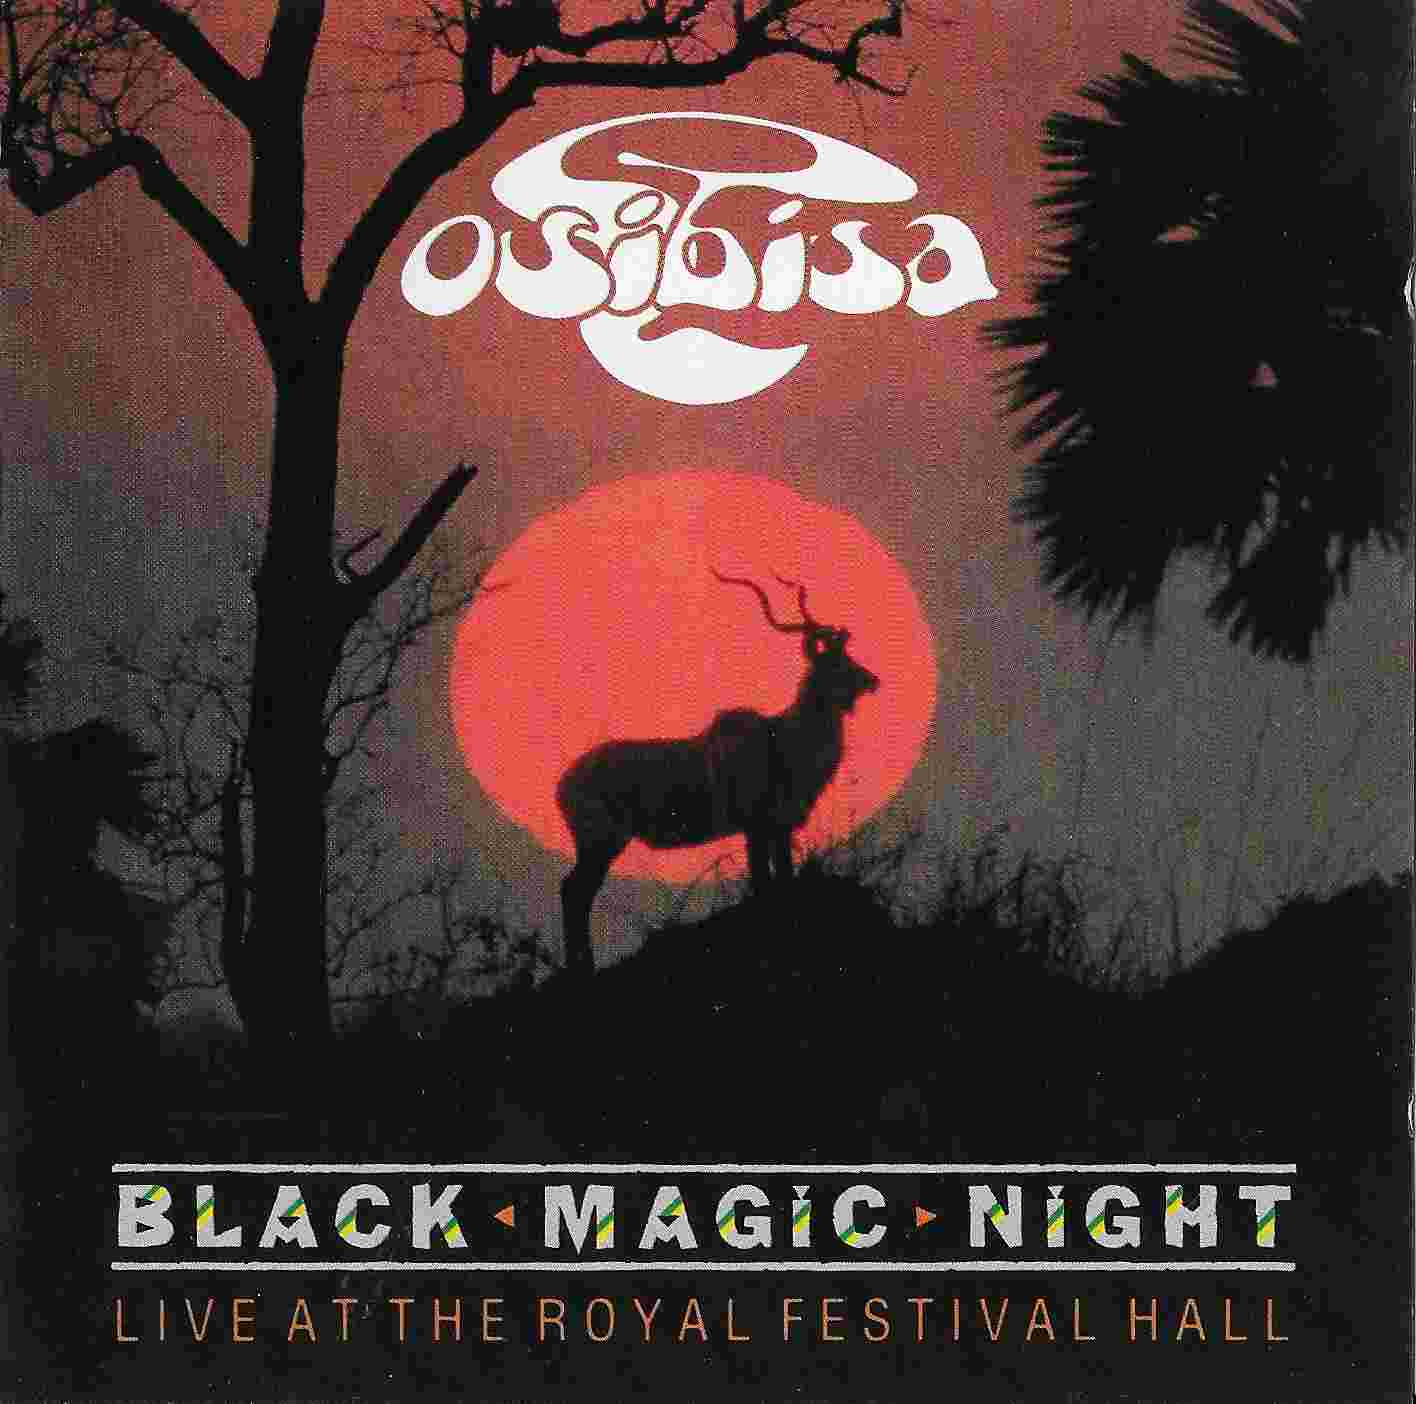 Picture of Black magic night by artist Osibisa from the BBC cds - Records and Tapes library